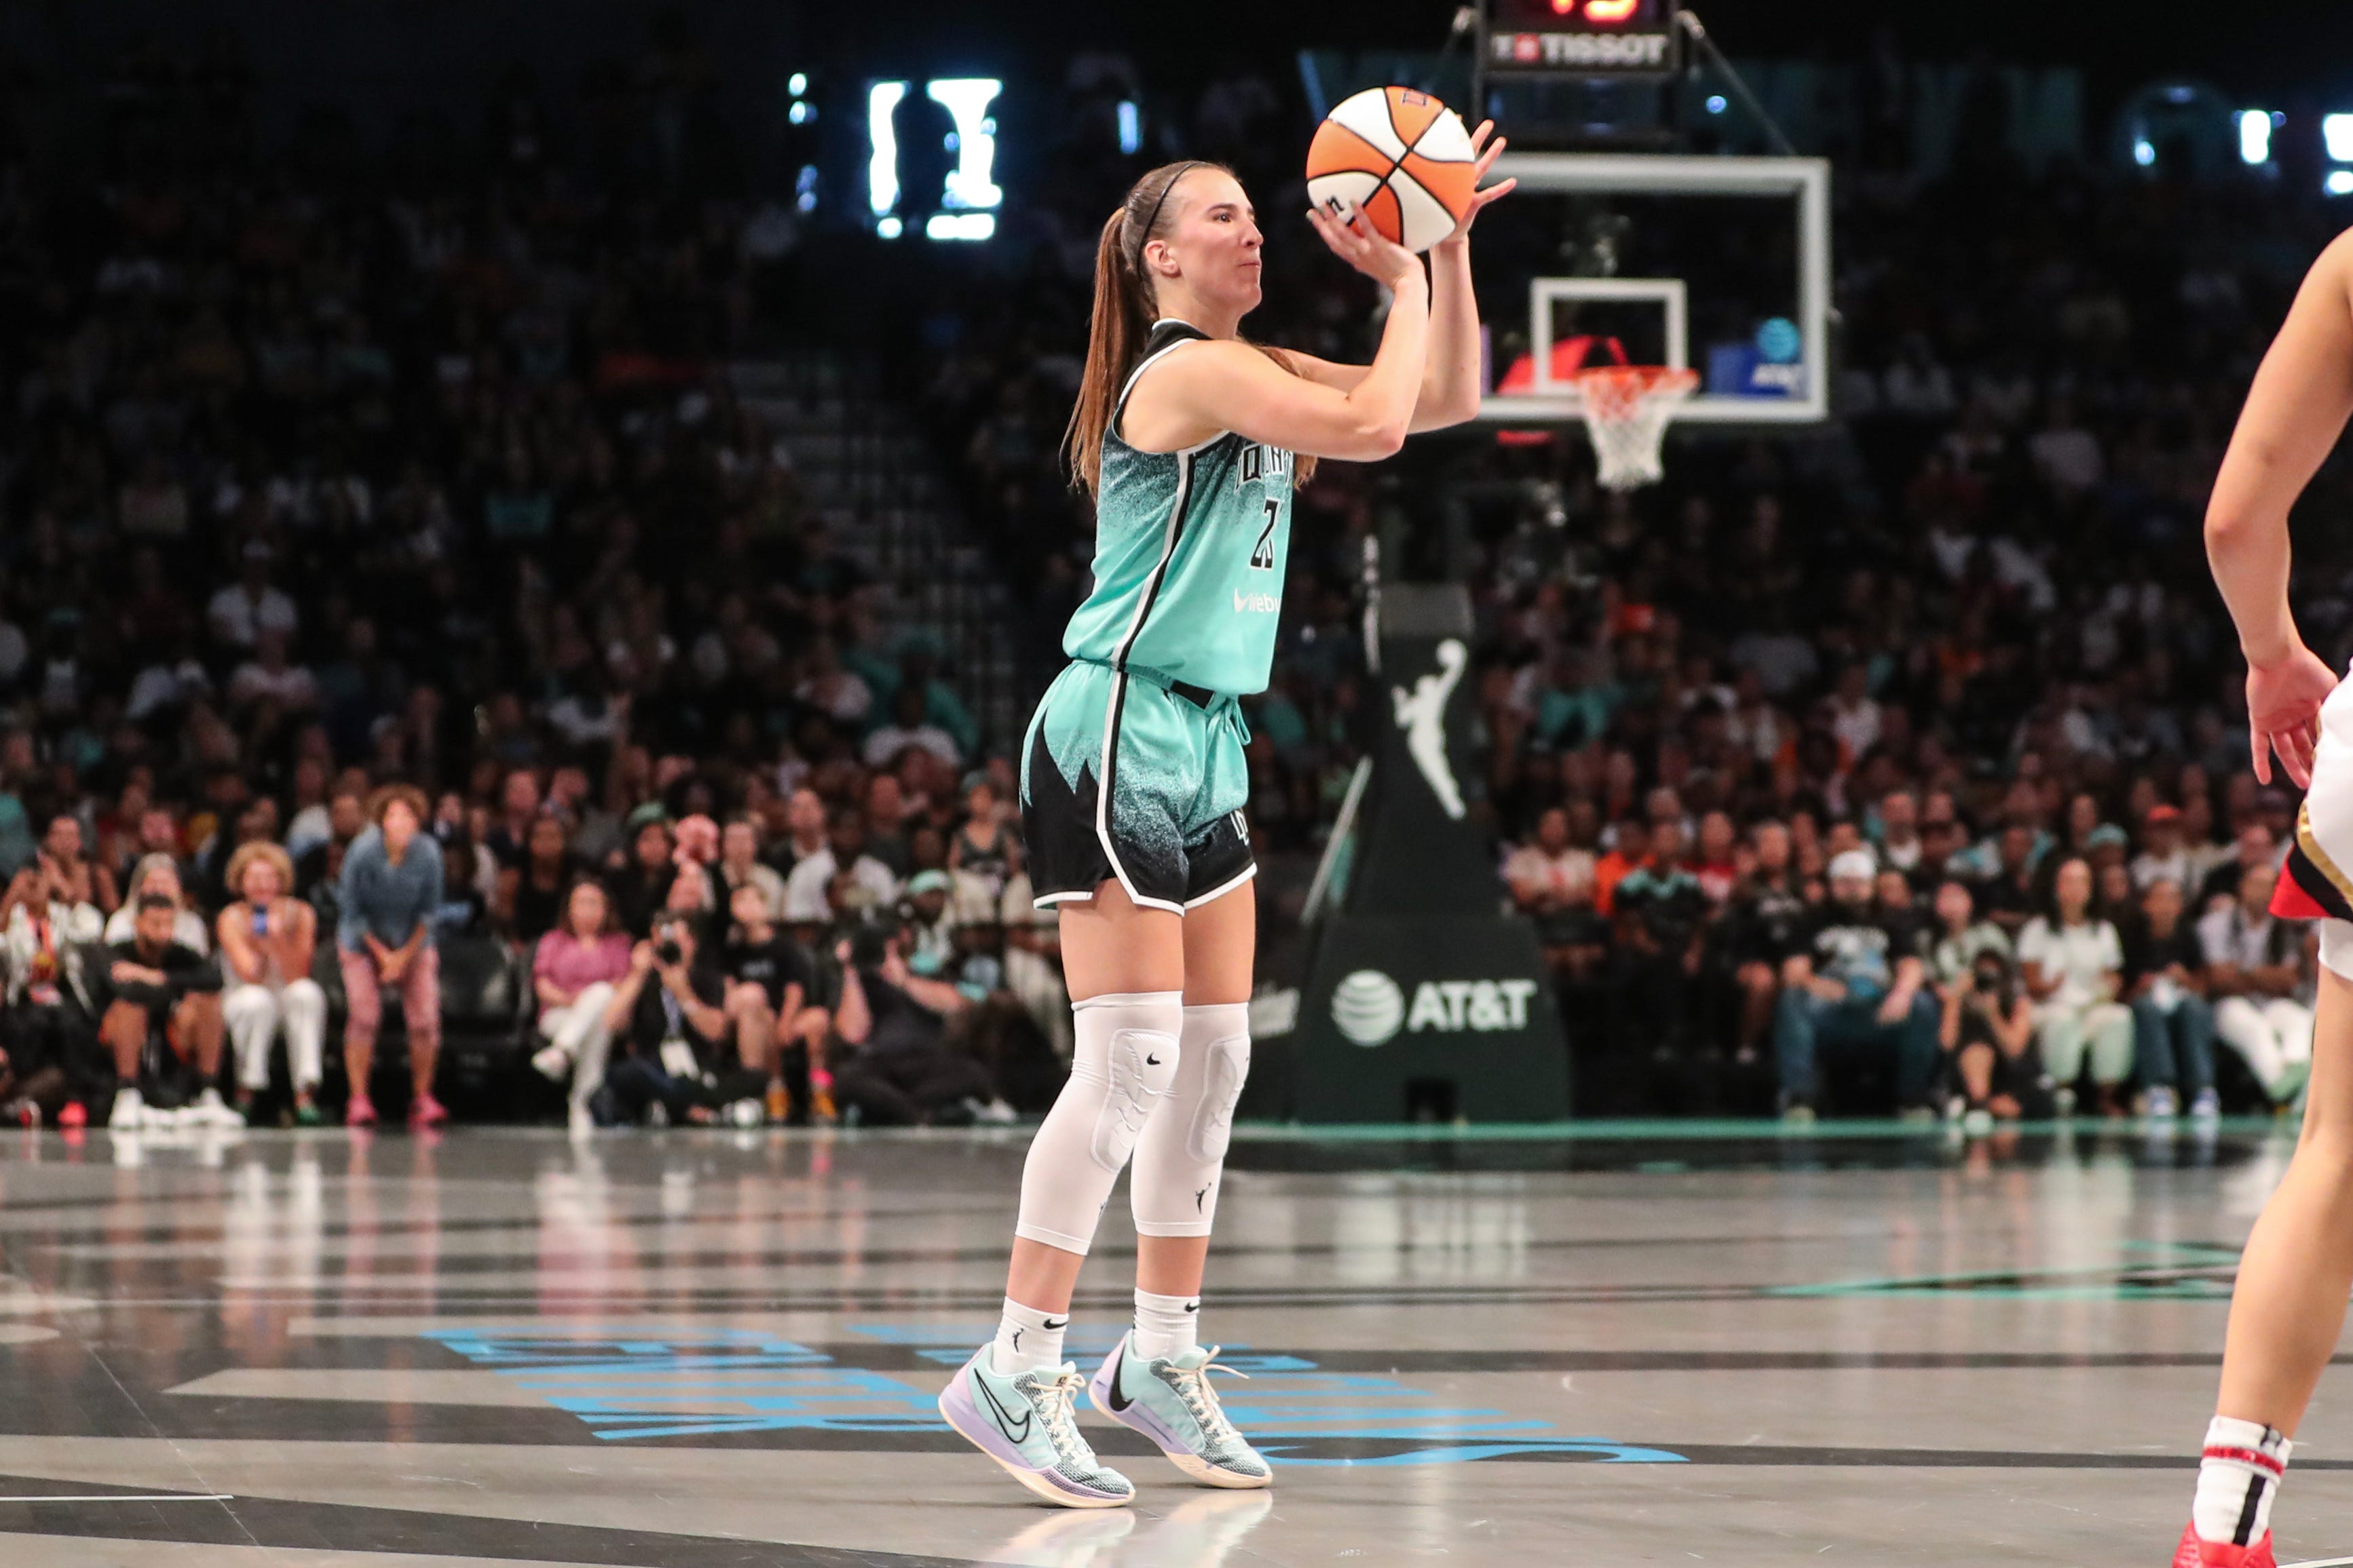 steph curry vs. sabrina ionescu in a 3-point contest at nba all-star weekend? it's possible